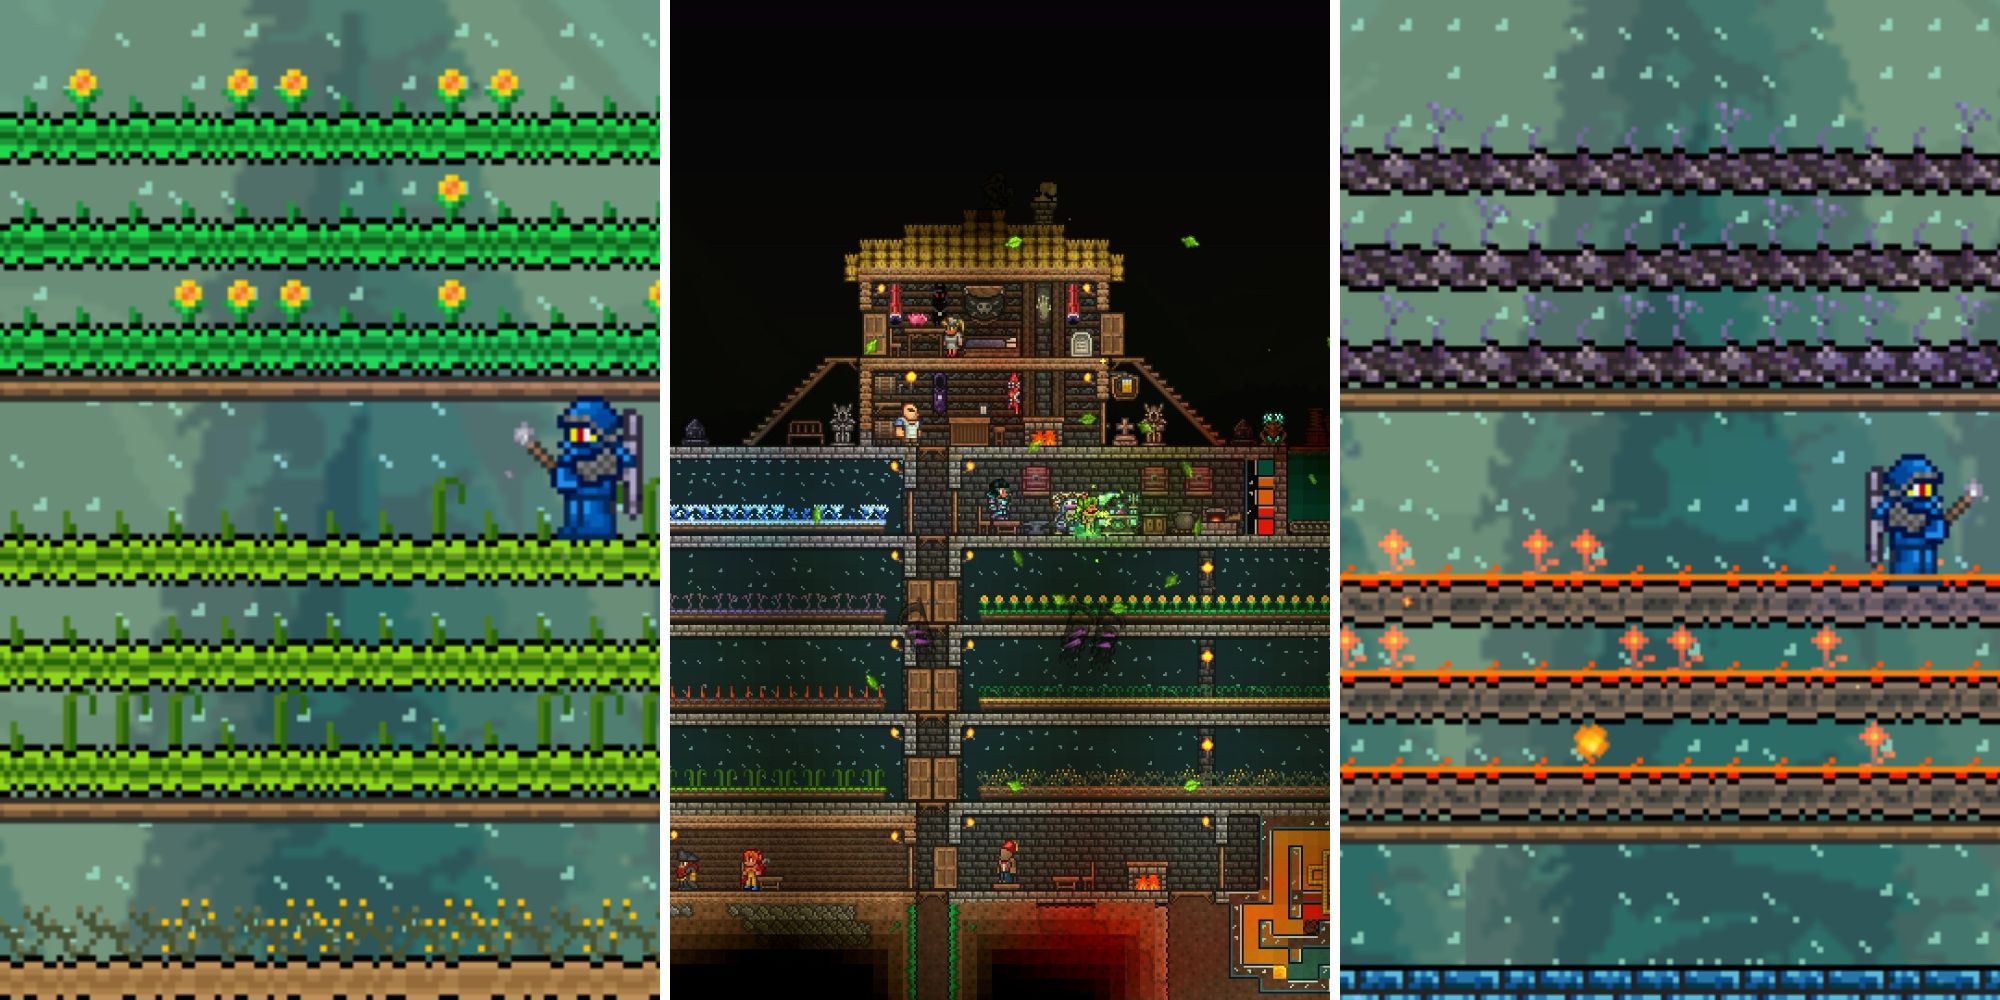 Items - Endless Mana/Hp Potions | Page 2 | Terraria Community Forums